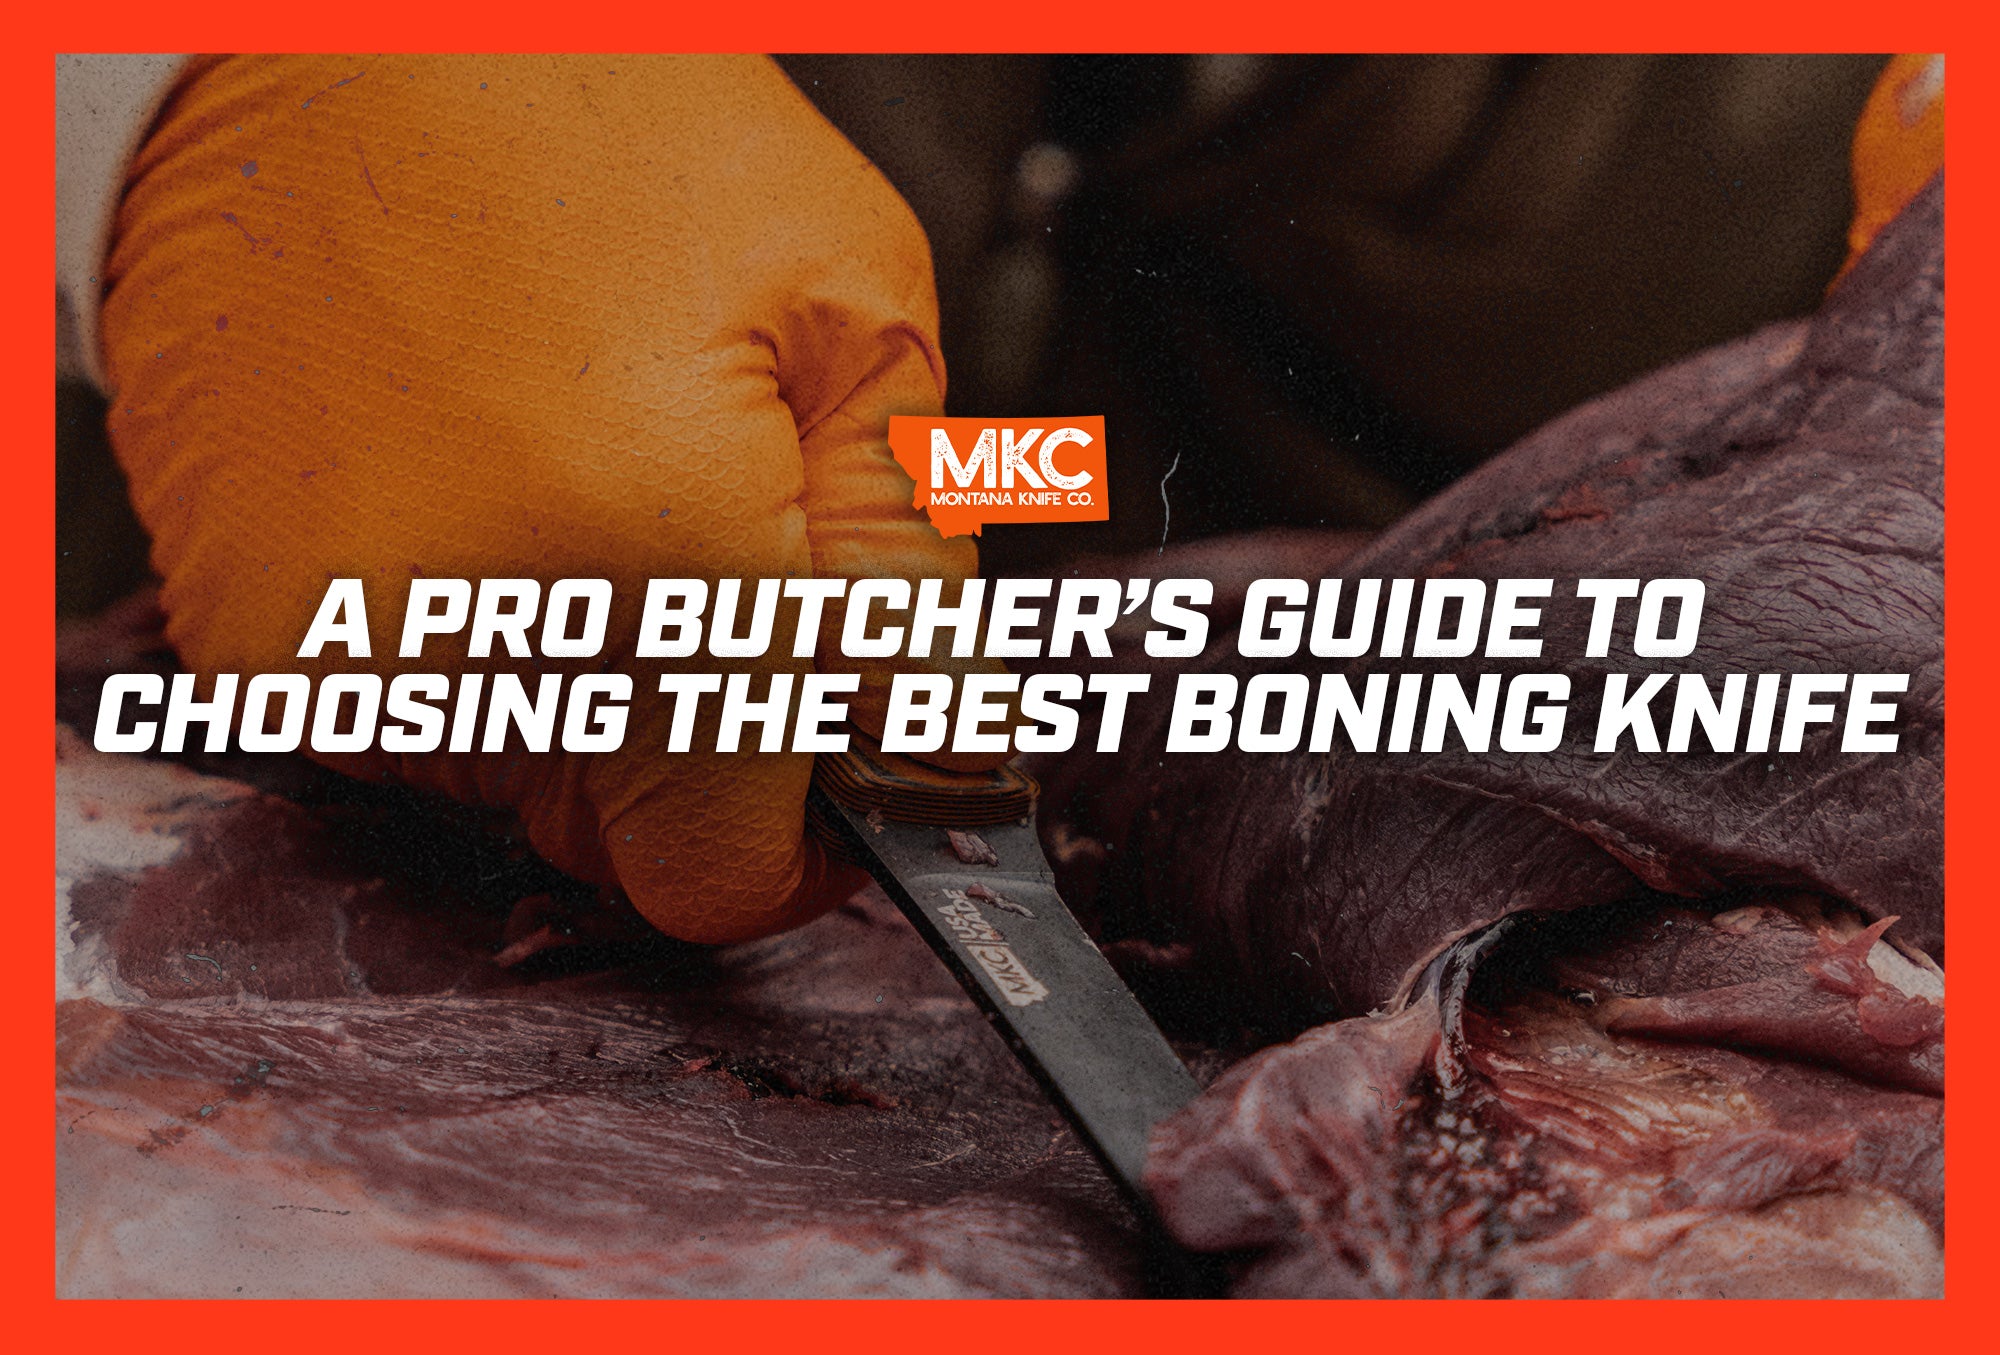 A man’s orange-gloved hand uses his best boning knife to butcher an animal carcass. 